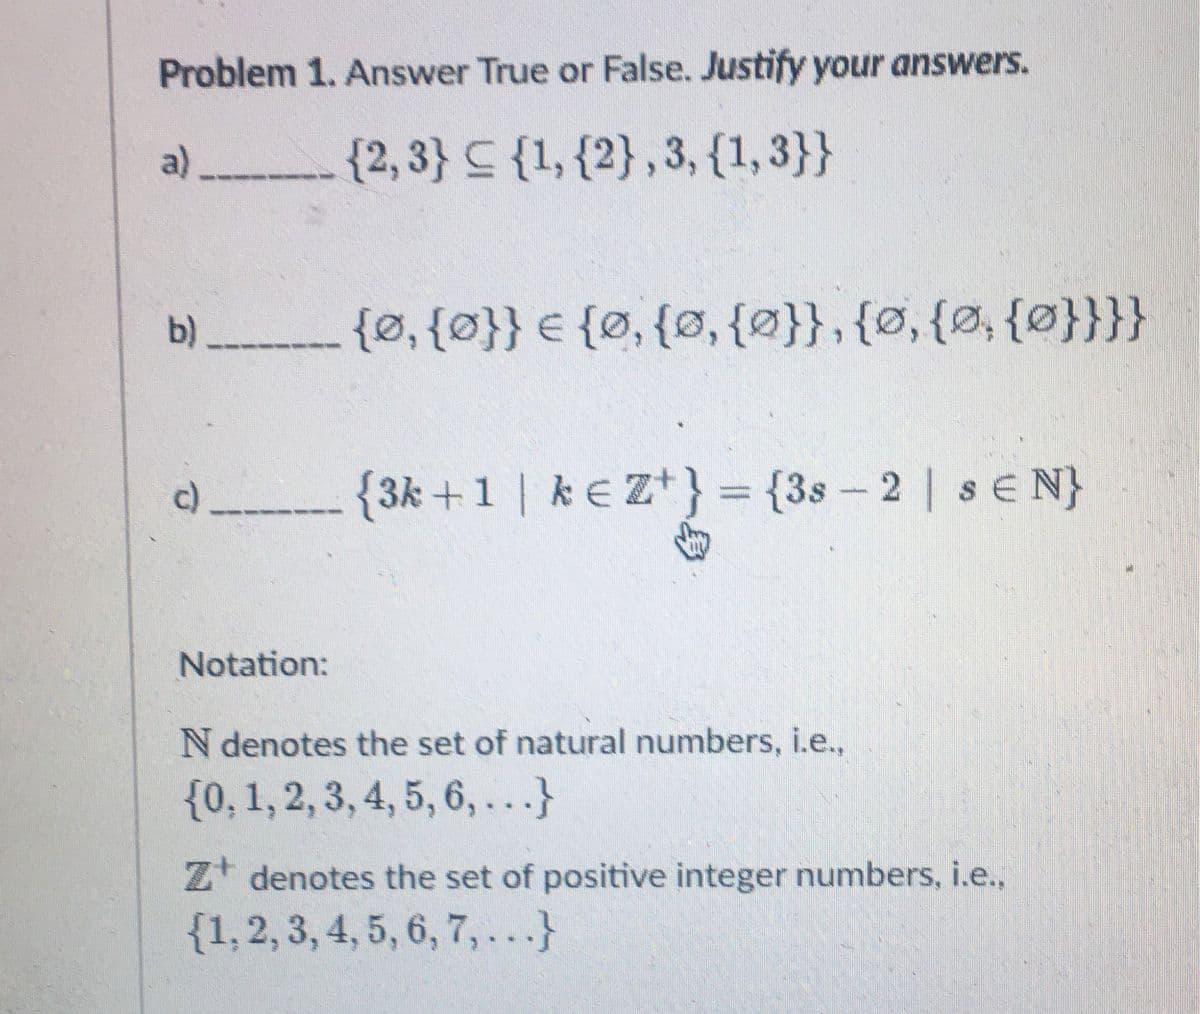 Problem 1. Answer True or False. Justify your answers.
{2,3} {1, {2}, 3, {1,3}}
a)
b) __________ {Ø, {0}} = {0, {0, {0}}, {0, {0, {0}}}}
c)
Notation:
{3k +1 | ke Z+} = {3s-2 | s E N}
N denotes the set of natural numbers, i.e.,
{0, 1, 2, 3, 4, 5, 6,...}
Z+ denotes the set of positive integer numbers, i.e.,
{1, 2, 3, 4, 5, 6, 7,...}